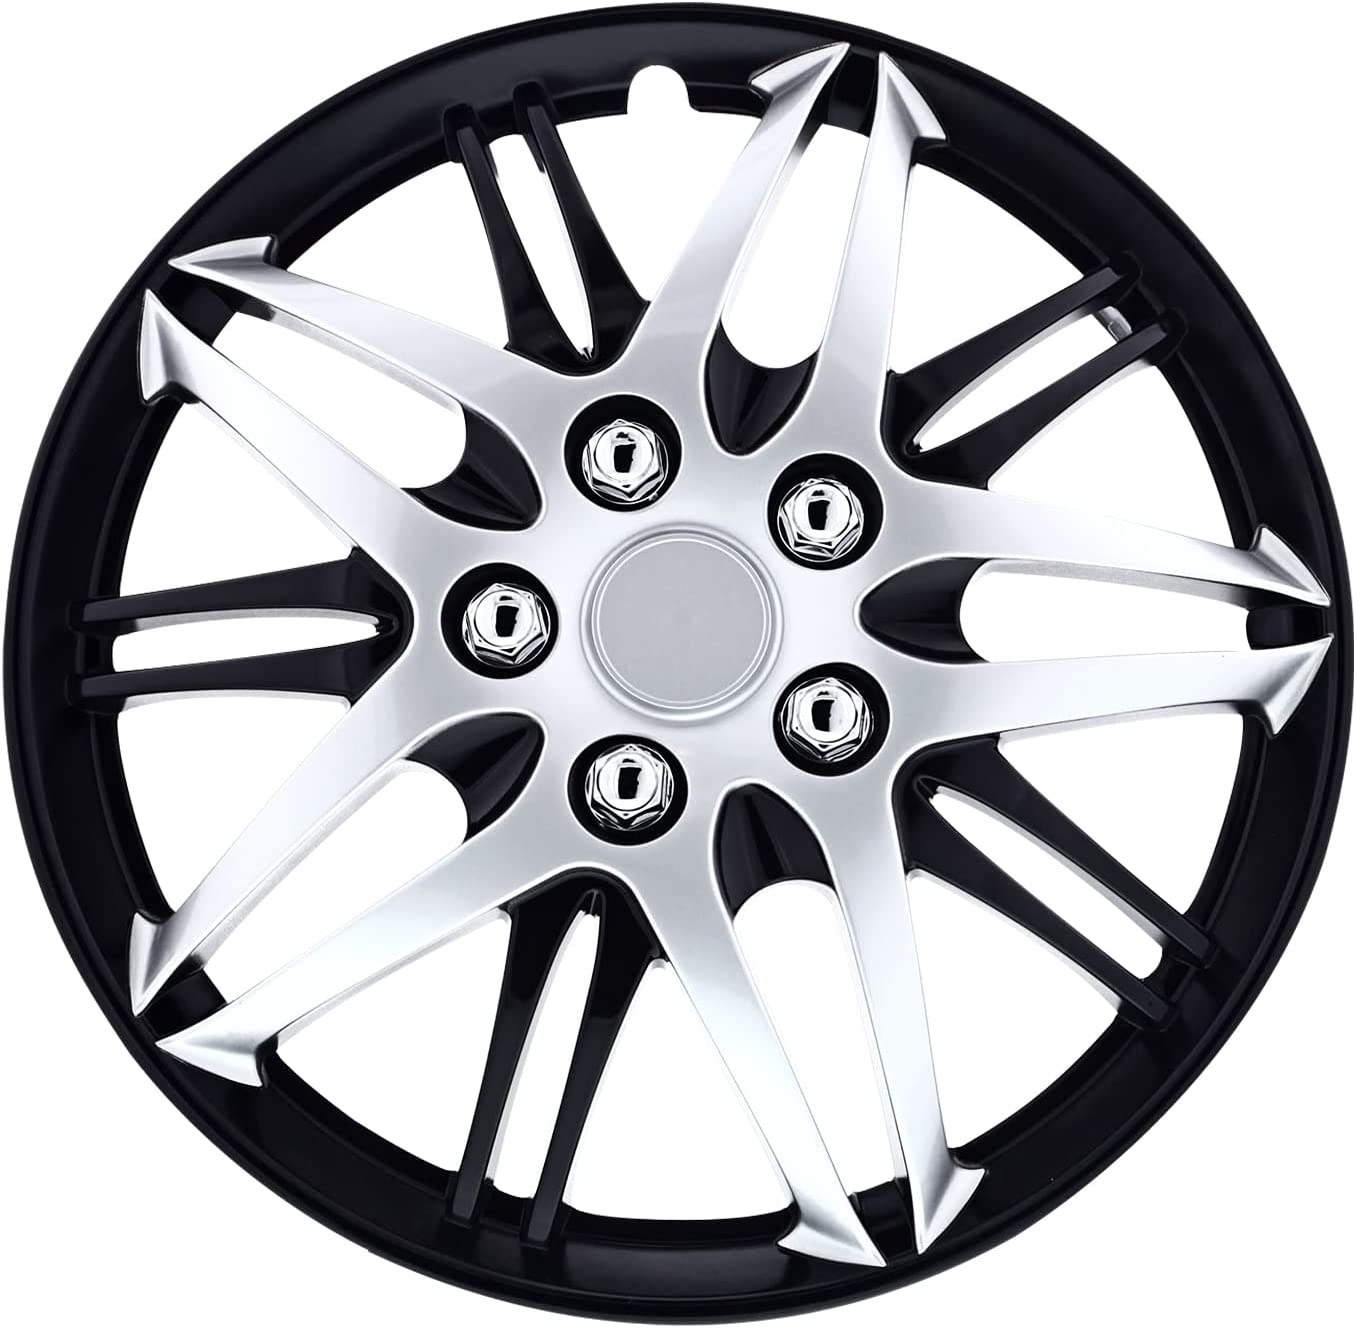 Wheel Cover Kit, 14 Inch Set of 4 Automotive Hubcaps with Universal Snap-On Retention Rings